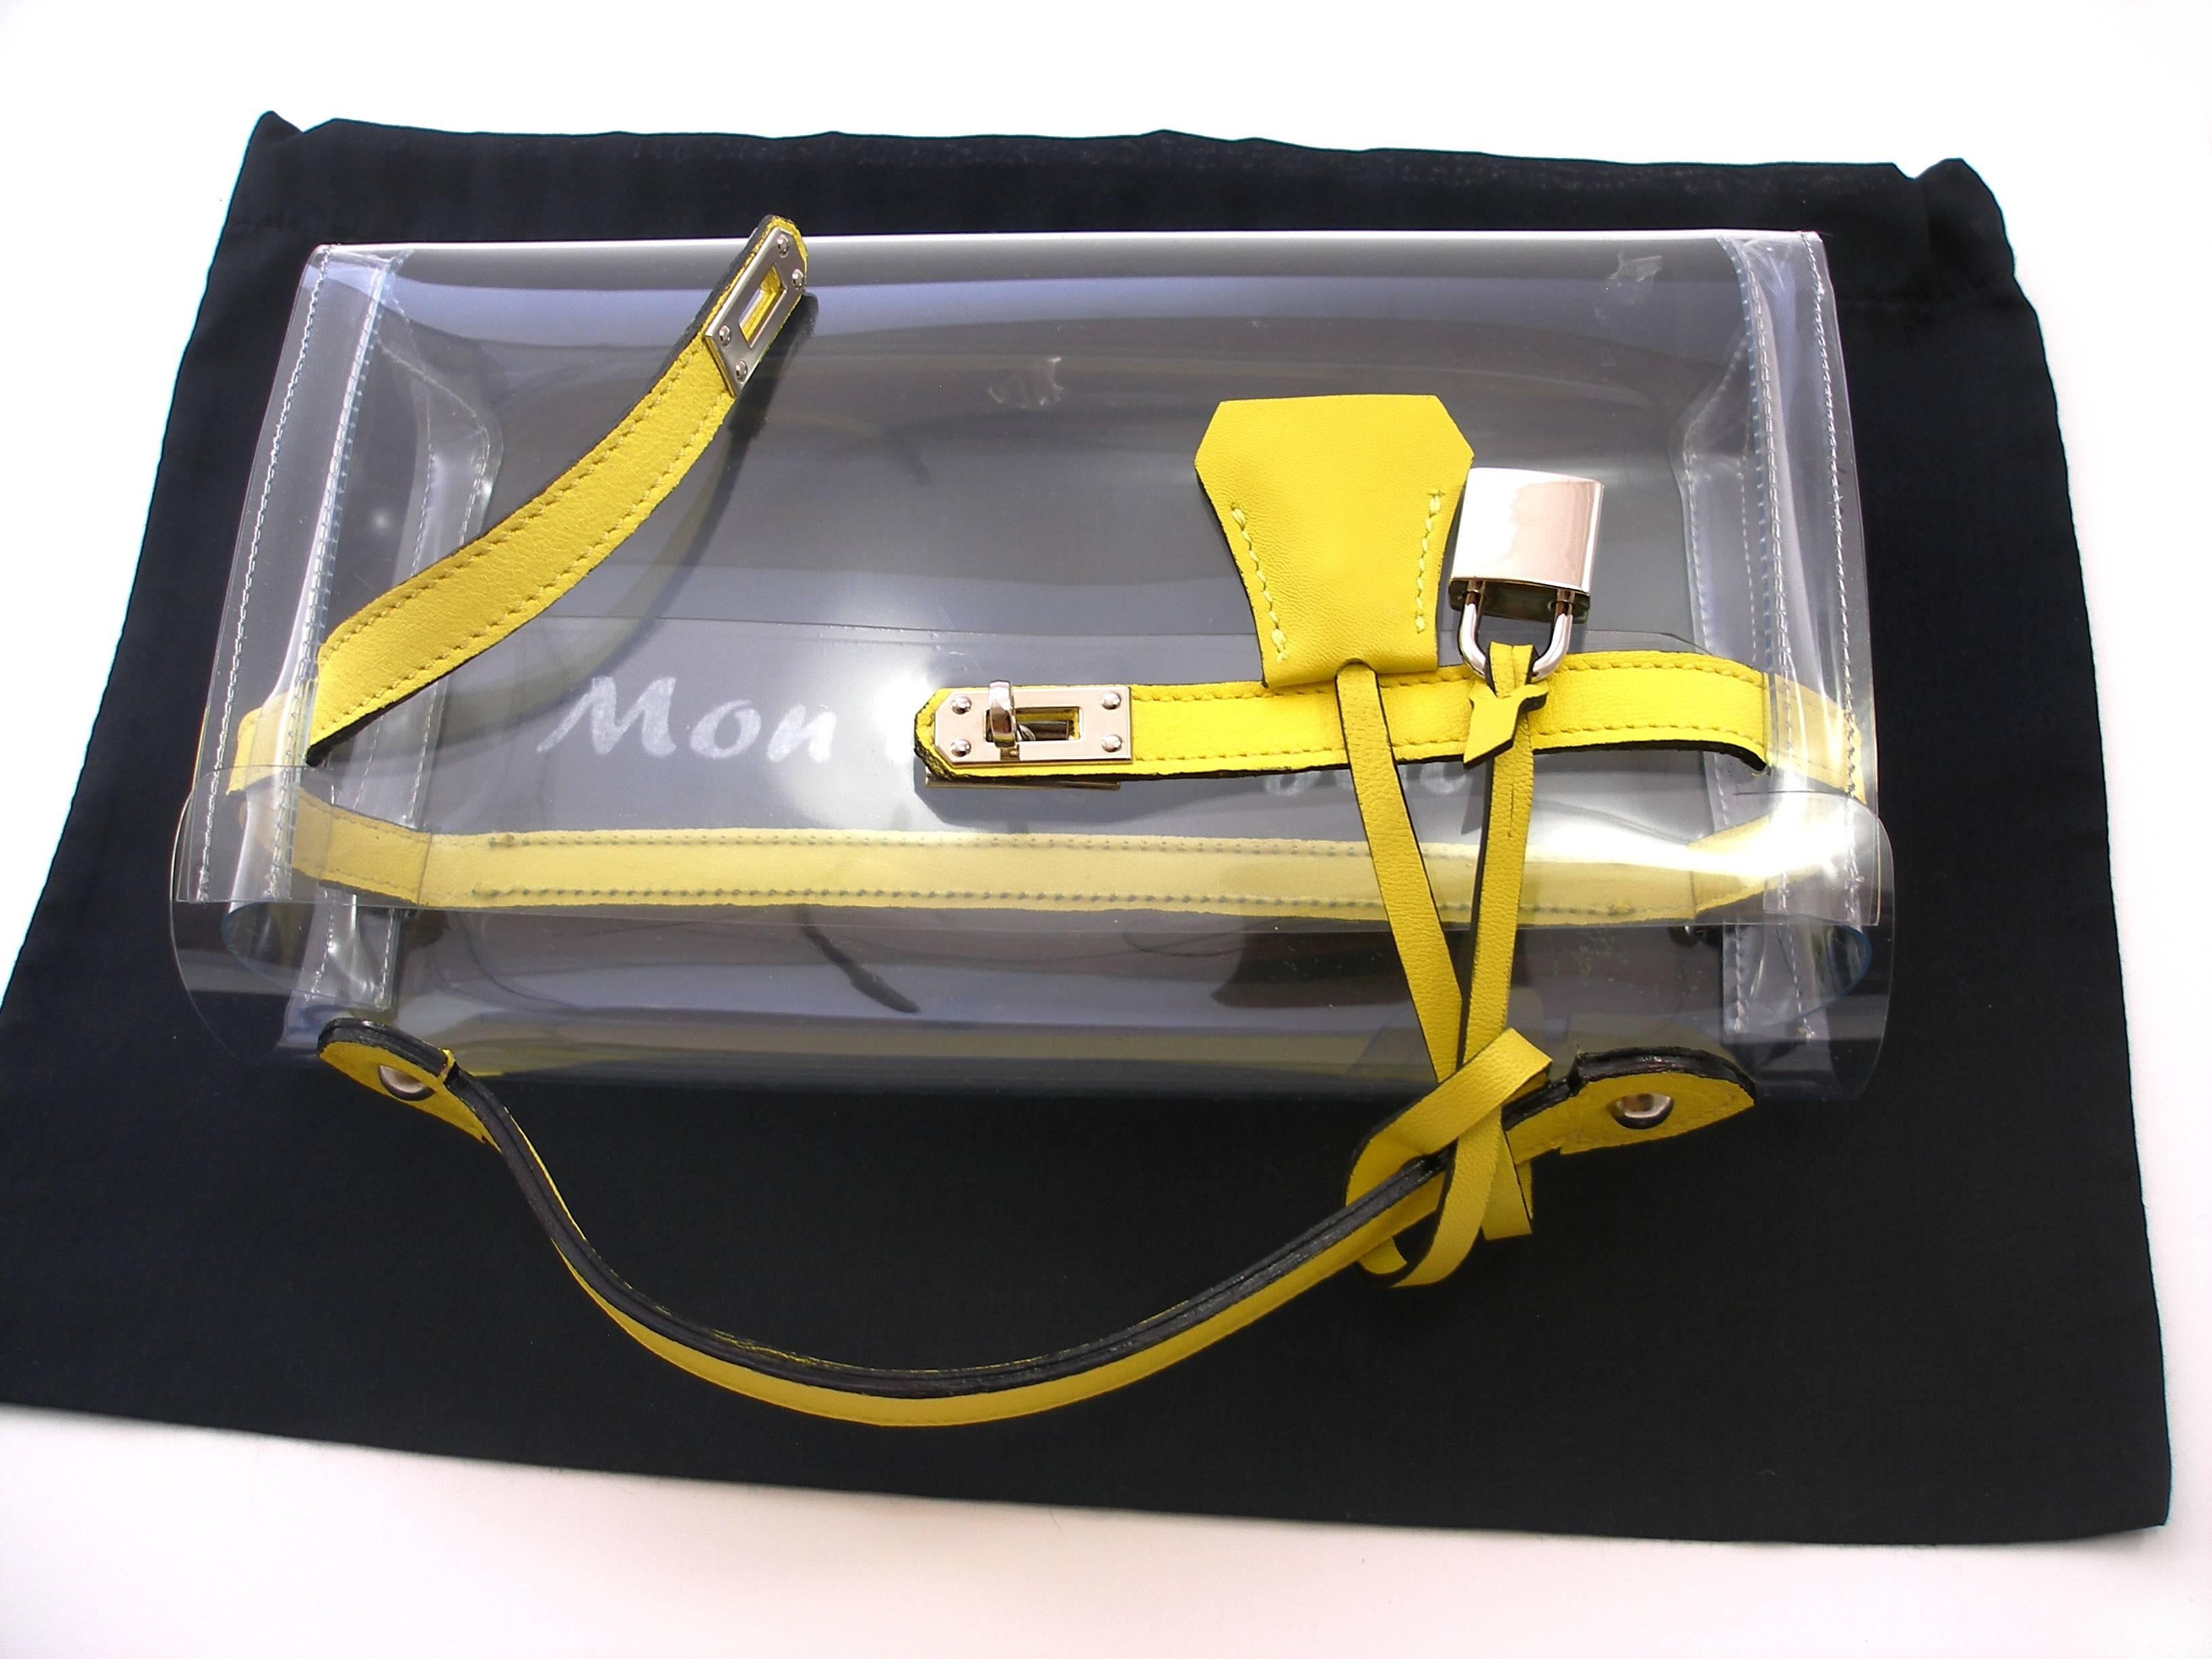 Women's ORIGINAL Mon Autre Sac ® Clutch Crystal Pvc and Yellow leather / Brand New 